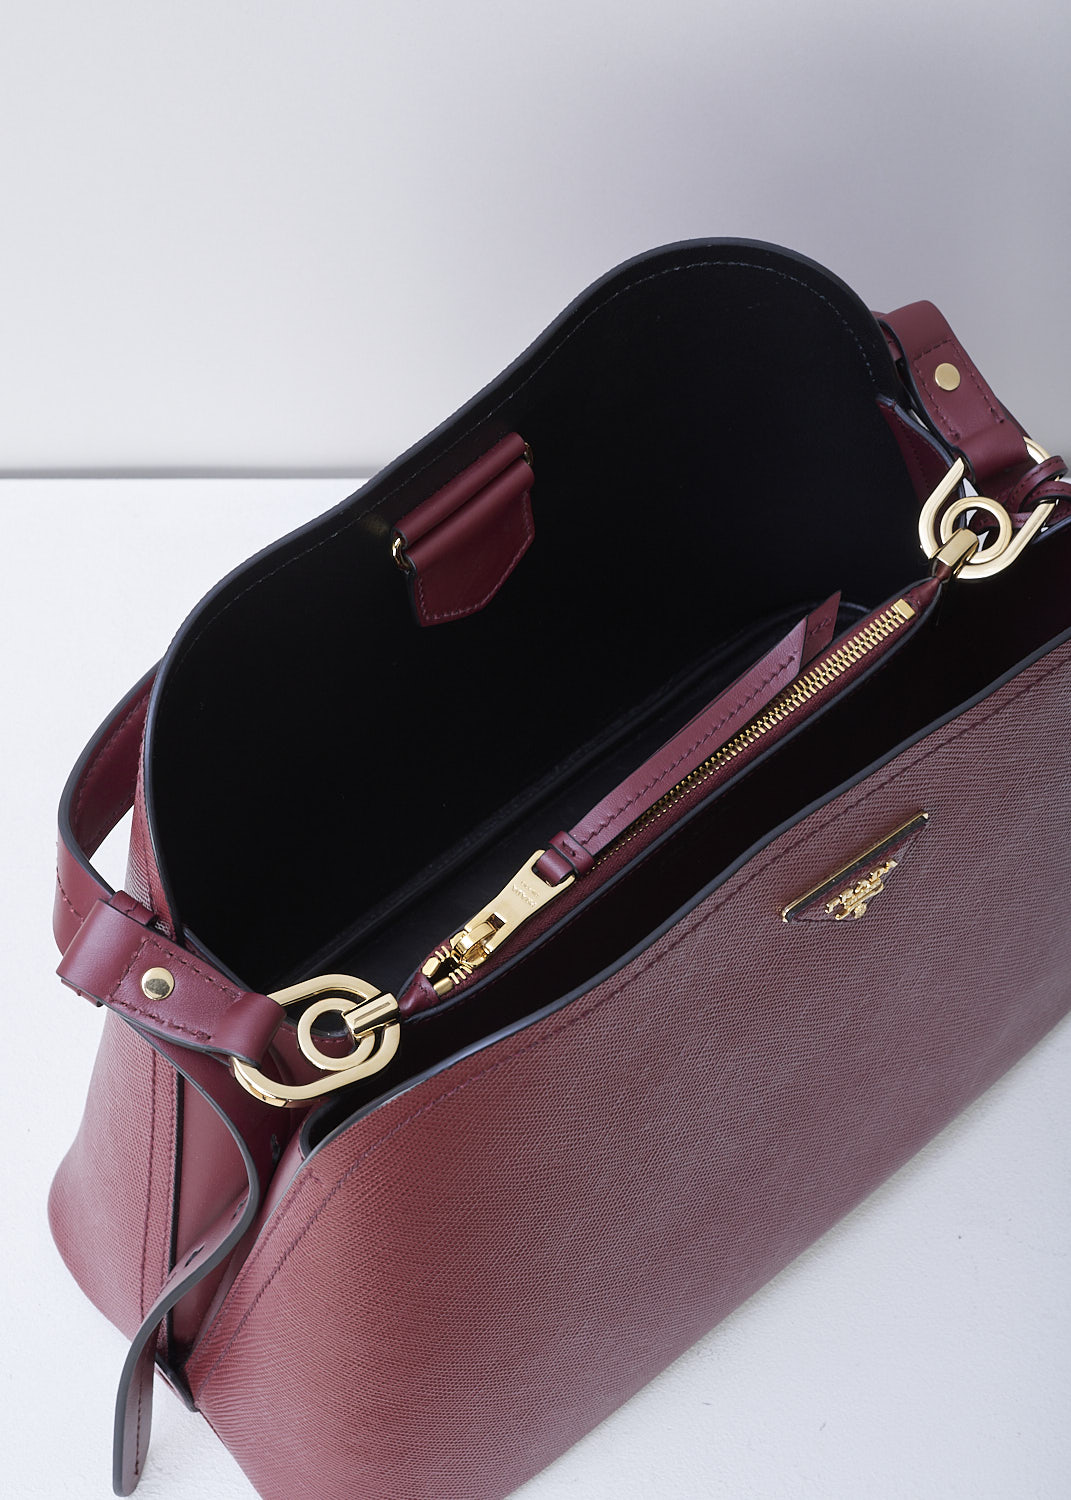 PRADA, MEDIUM MATINÃ‰E SHOULDER BAG IN CHERRY RED, SAFFIANO_CUIR_C_1BA249_CERISE_NERO, Red, Detail 1, This cherry red MatinÃ©e shoulder bag is made with Saffiano leather. Both the leather handle and shoulder strap are adjustable and detachable. The bag has gold-tone metal hardware with the brand's triangle logo plaque on the front. The open top has a magnetic snap closure in the middle. The black interior has a centre zip pocket that divides the main compartment into two spacious sides. The bag has a removable leather keychain.  
 
